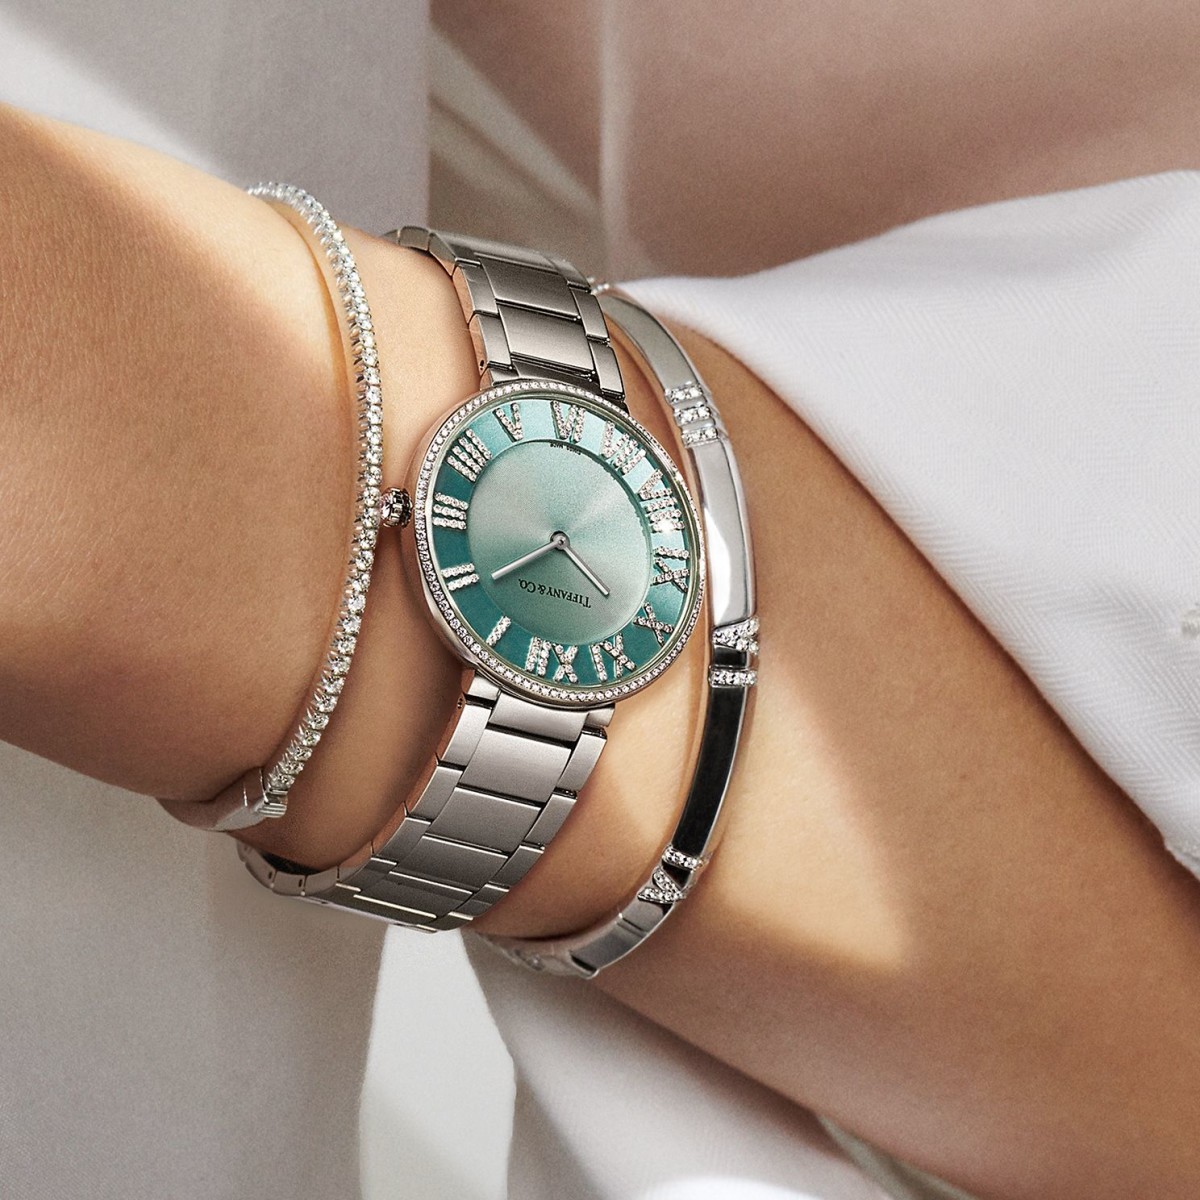 tiffany-co-atlas-mktgtile-watches-onfig